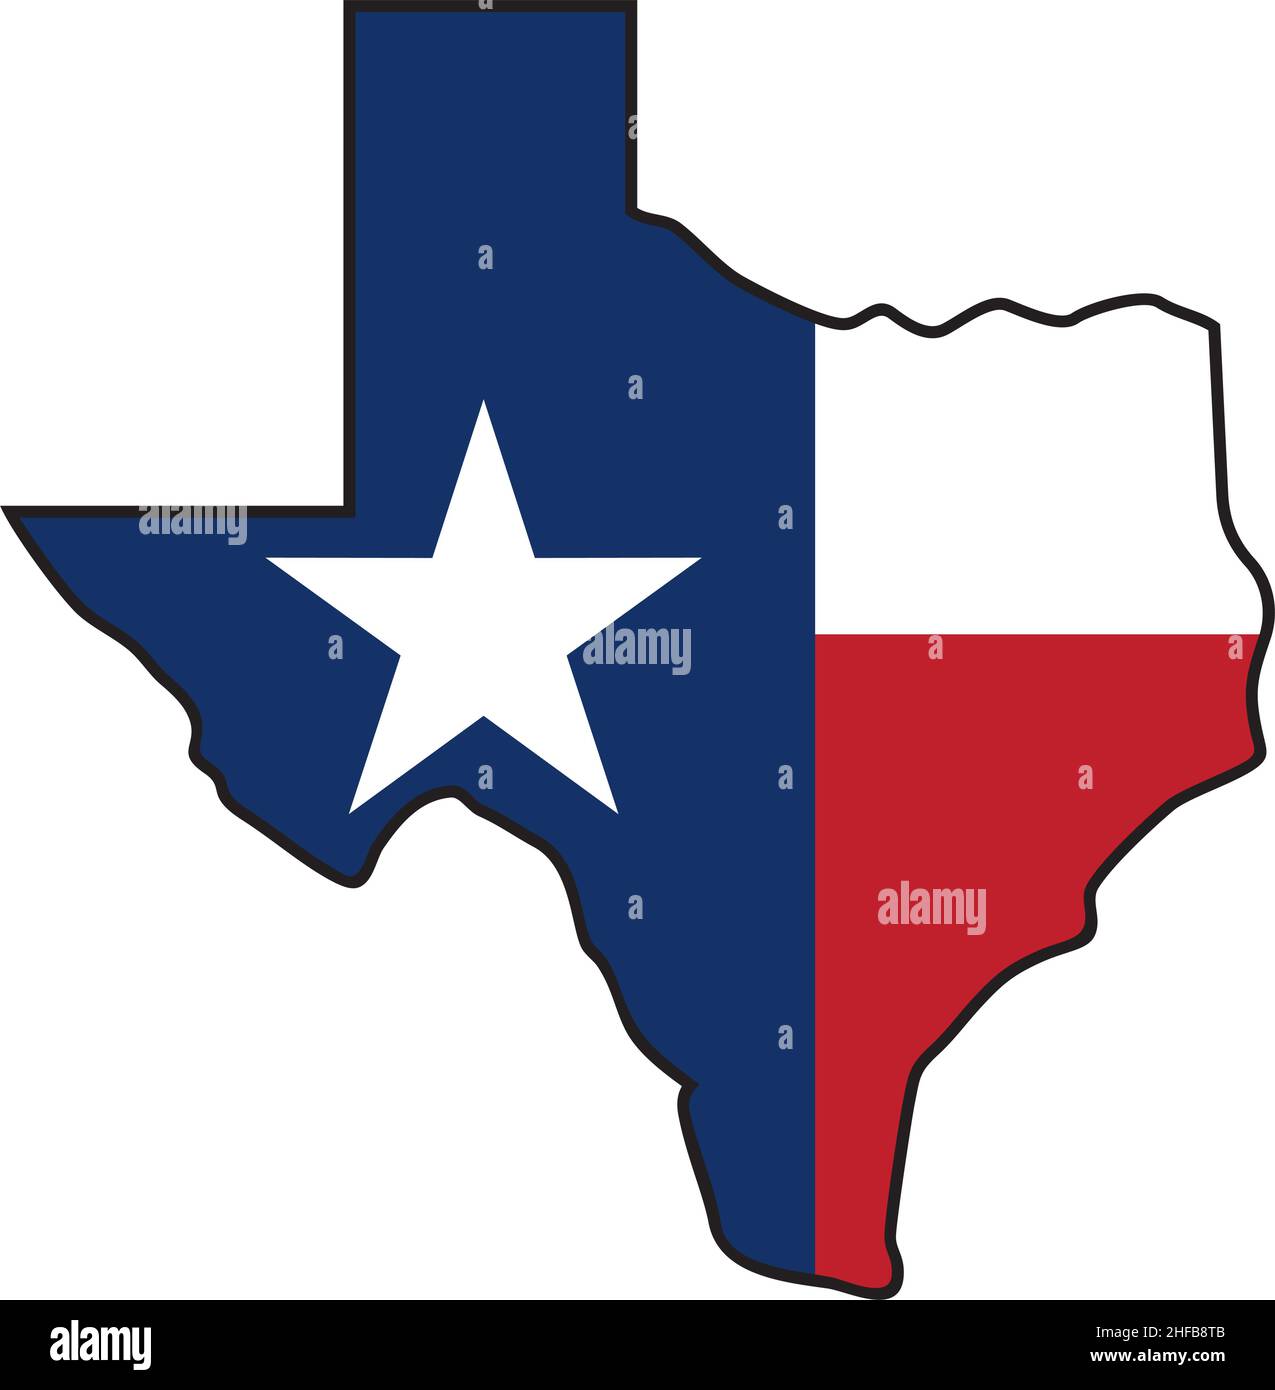 Texas map with flag (Lone Star State design). Vector illustration. Stock Vector